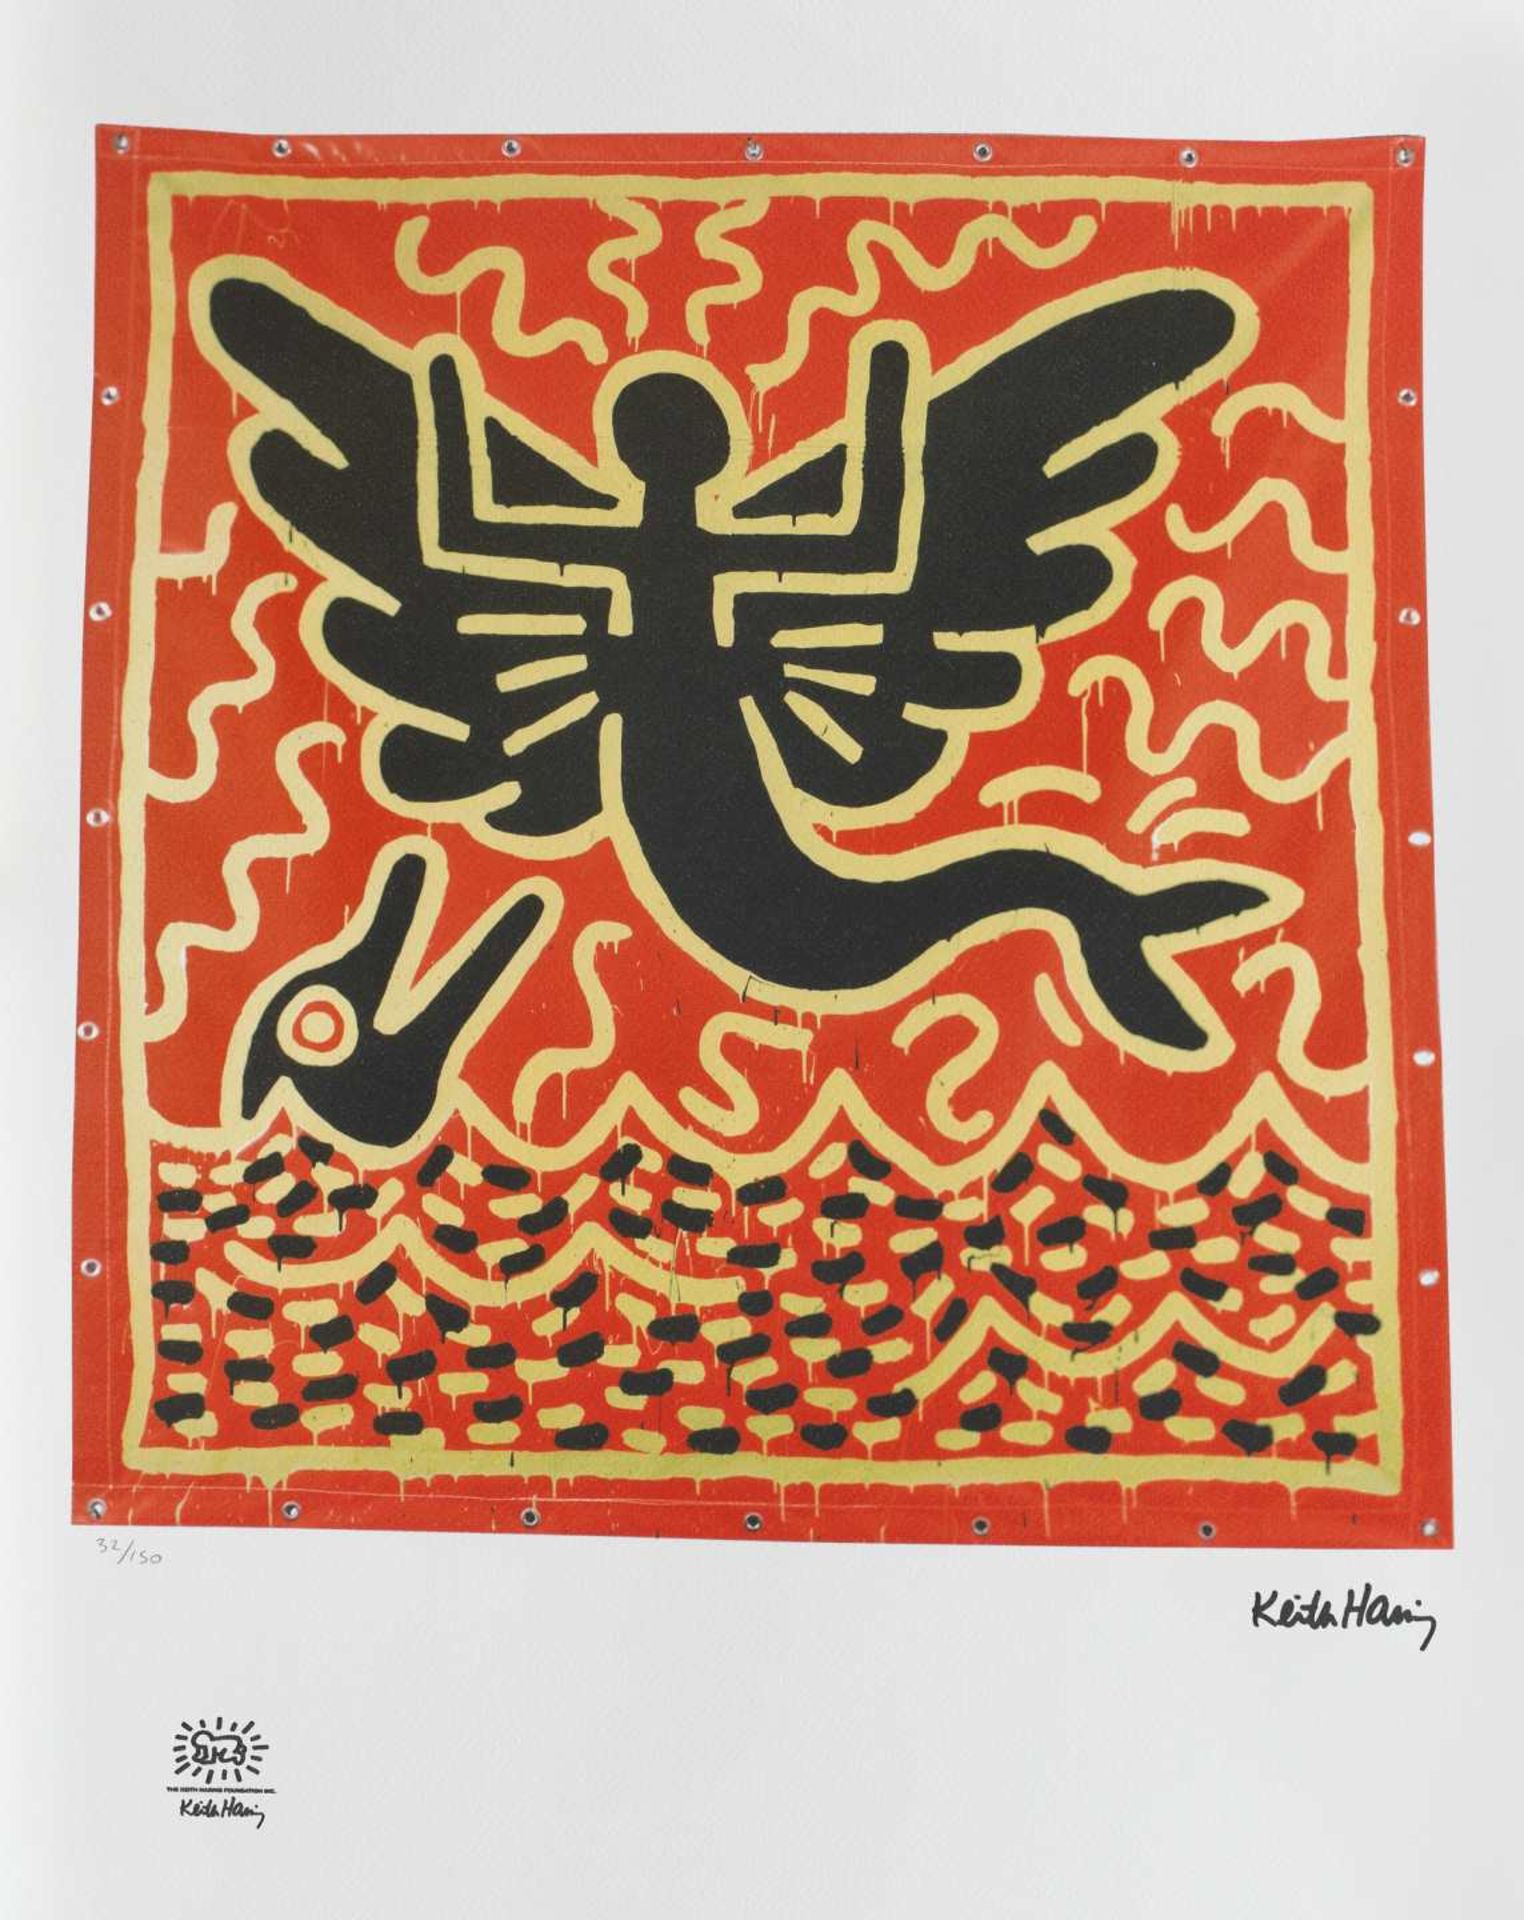 Keith Haring, Mermaid with DolphinKeith Haring, Mermaid with Dolphin, chromolithography, 46 ×